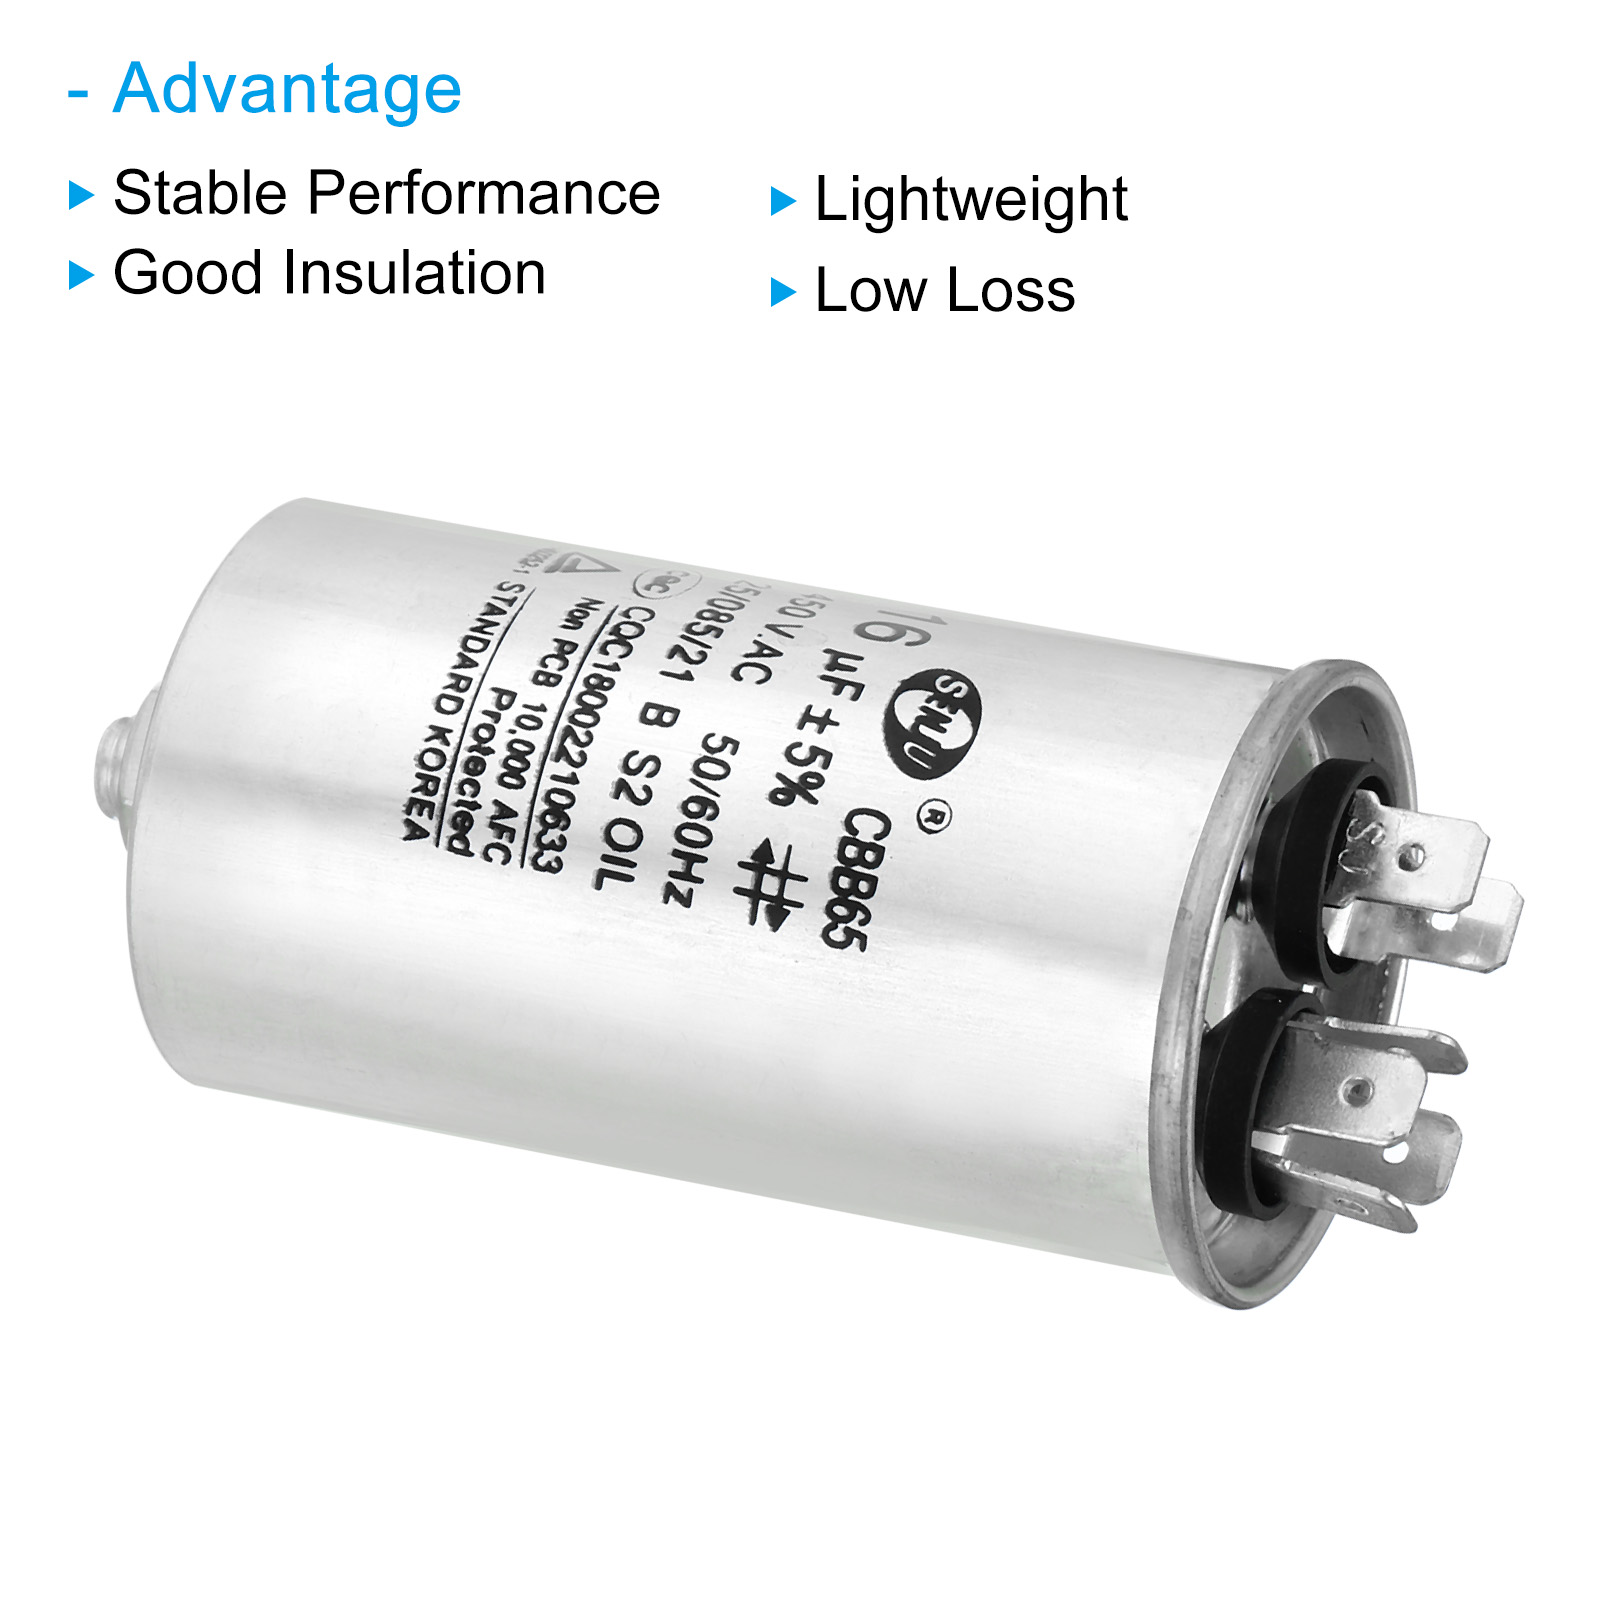 16uF 16MDF 450VAC Fan Start Capacitor, CBB65 Circular Run Capacitor with Screws for Air Conditioner - image 4 of 5